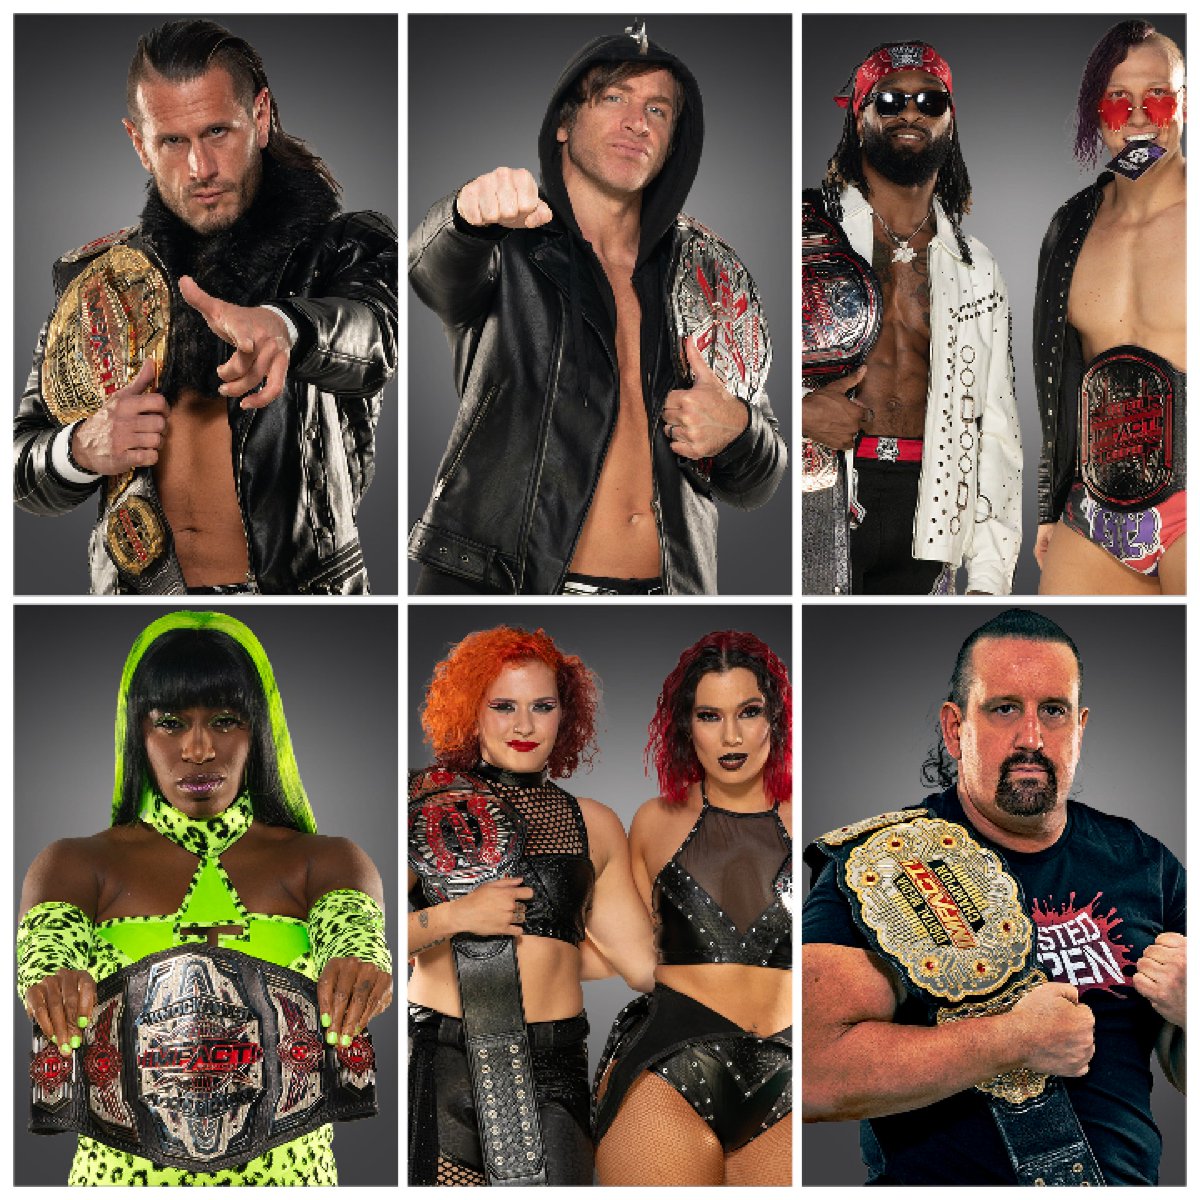 Current champions of impact wrestling post #BoundForGlory 

New additions: ABC